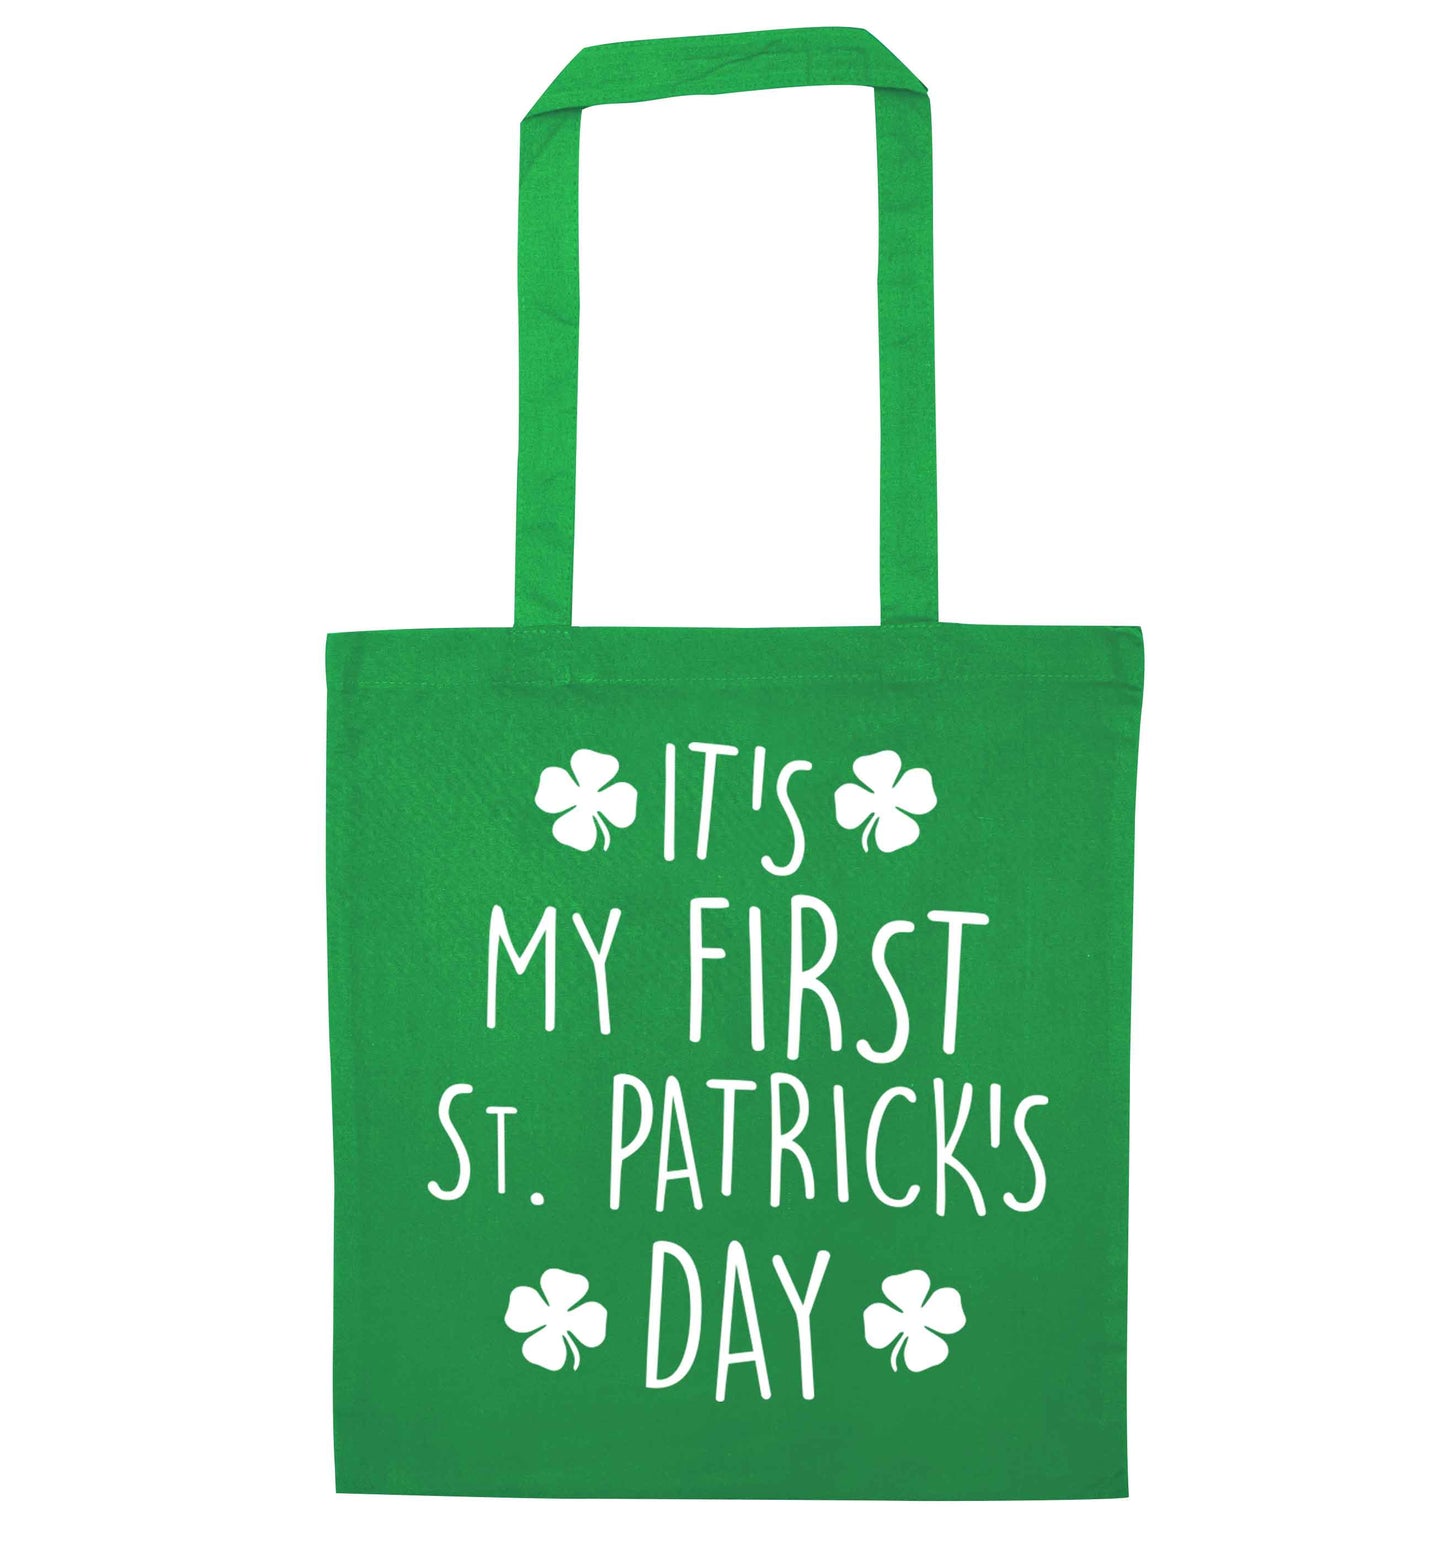 It's my first St.Patrick's day green tote bag